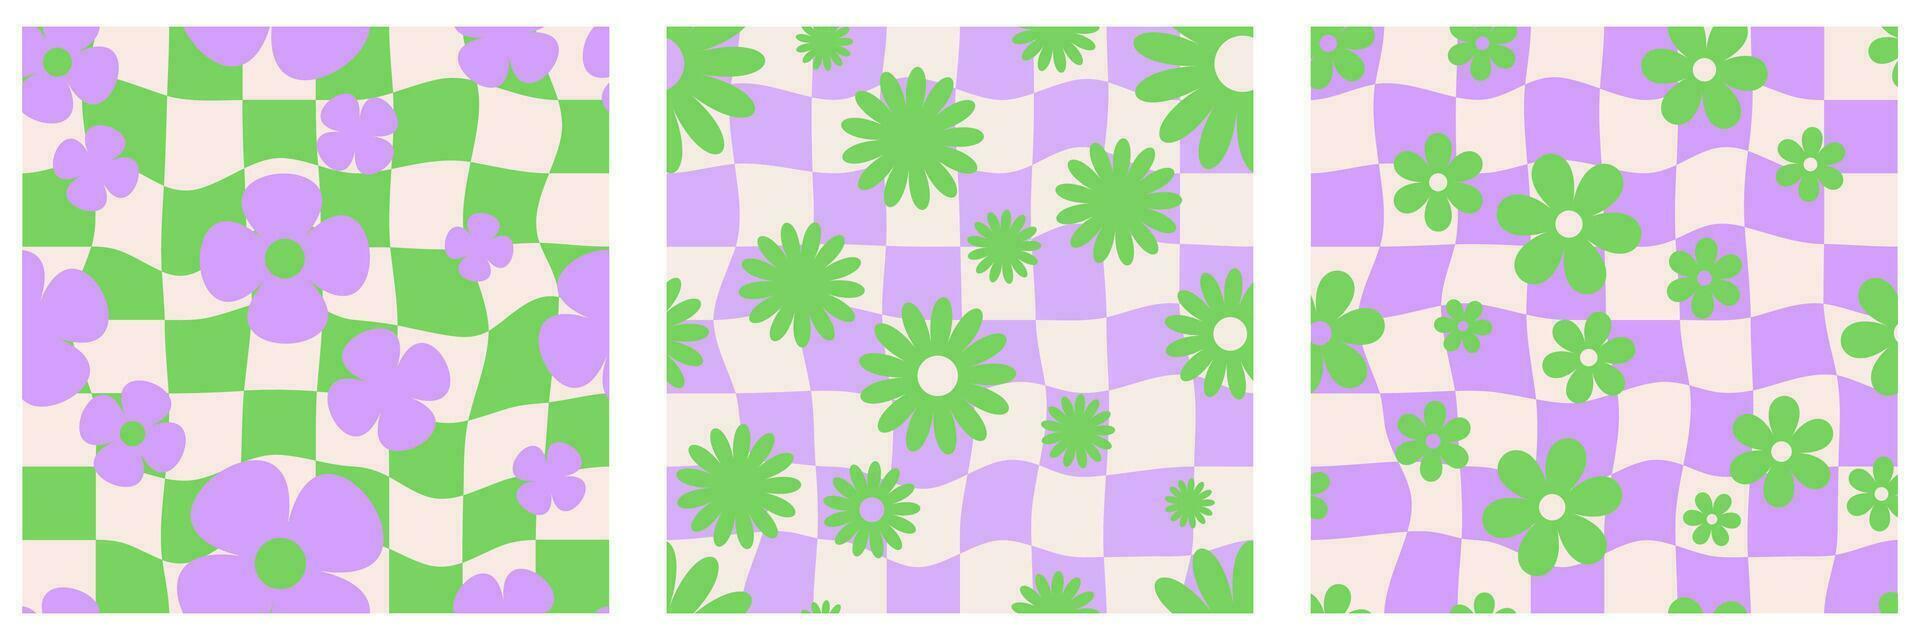 Y2k flower pattern. Groovy checkerboard with daisy. Seamless wavy floral backgrounds. Abstract vintage aesthetic funky wallpaper set. Vector cute trippy.